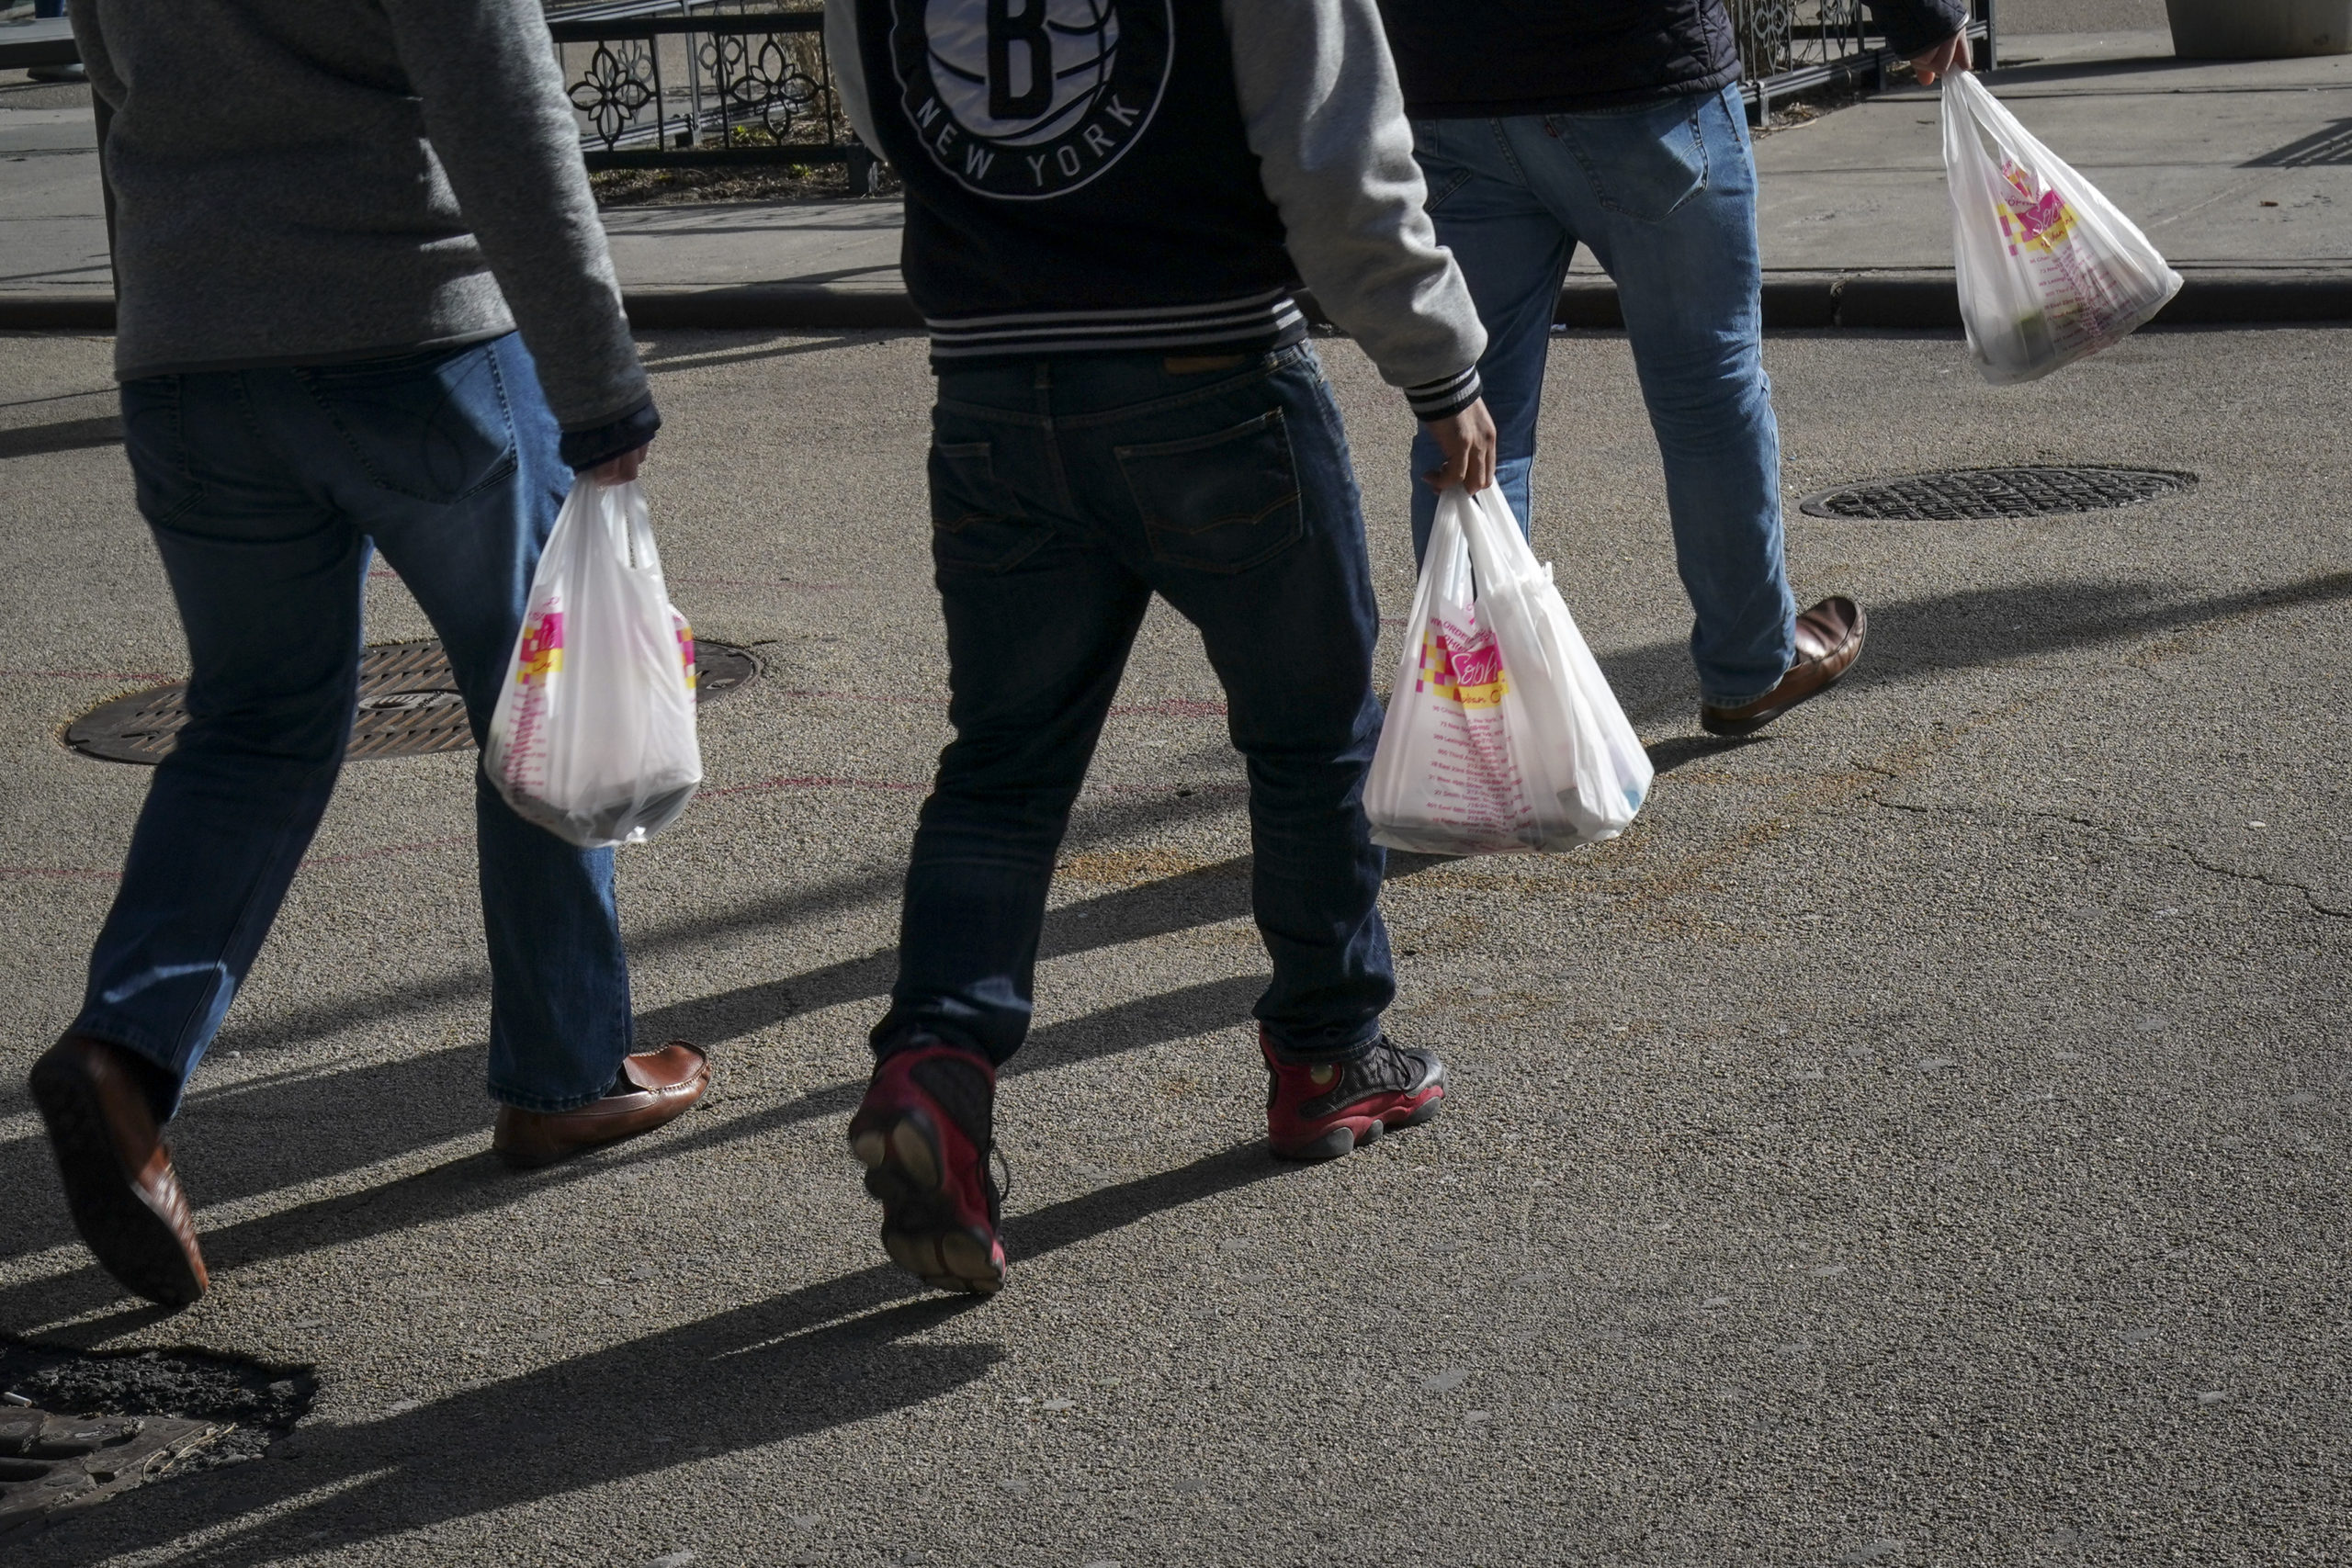 People carry plastic bags in 2019. (Drew Angerer/Getty Images)